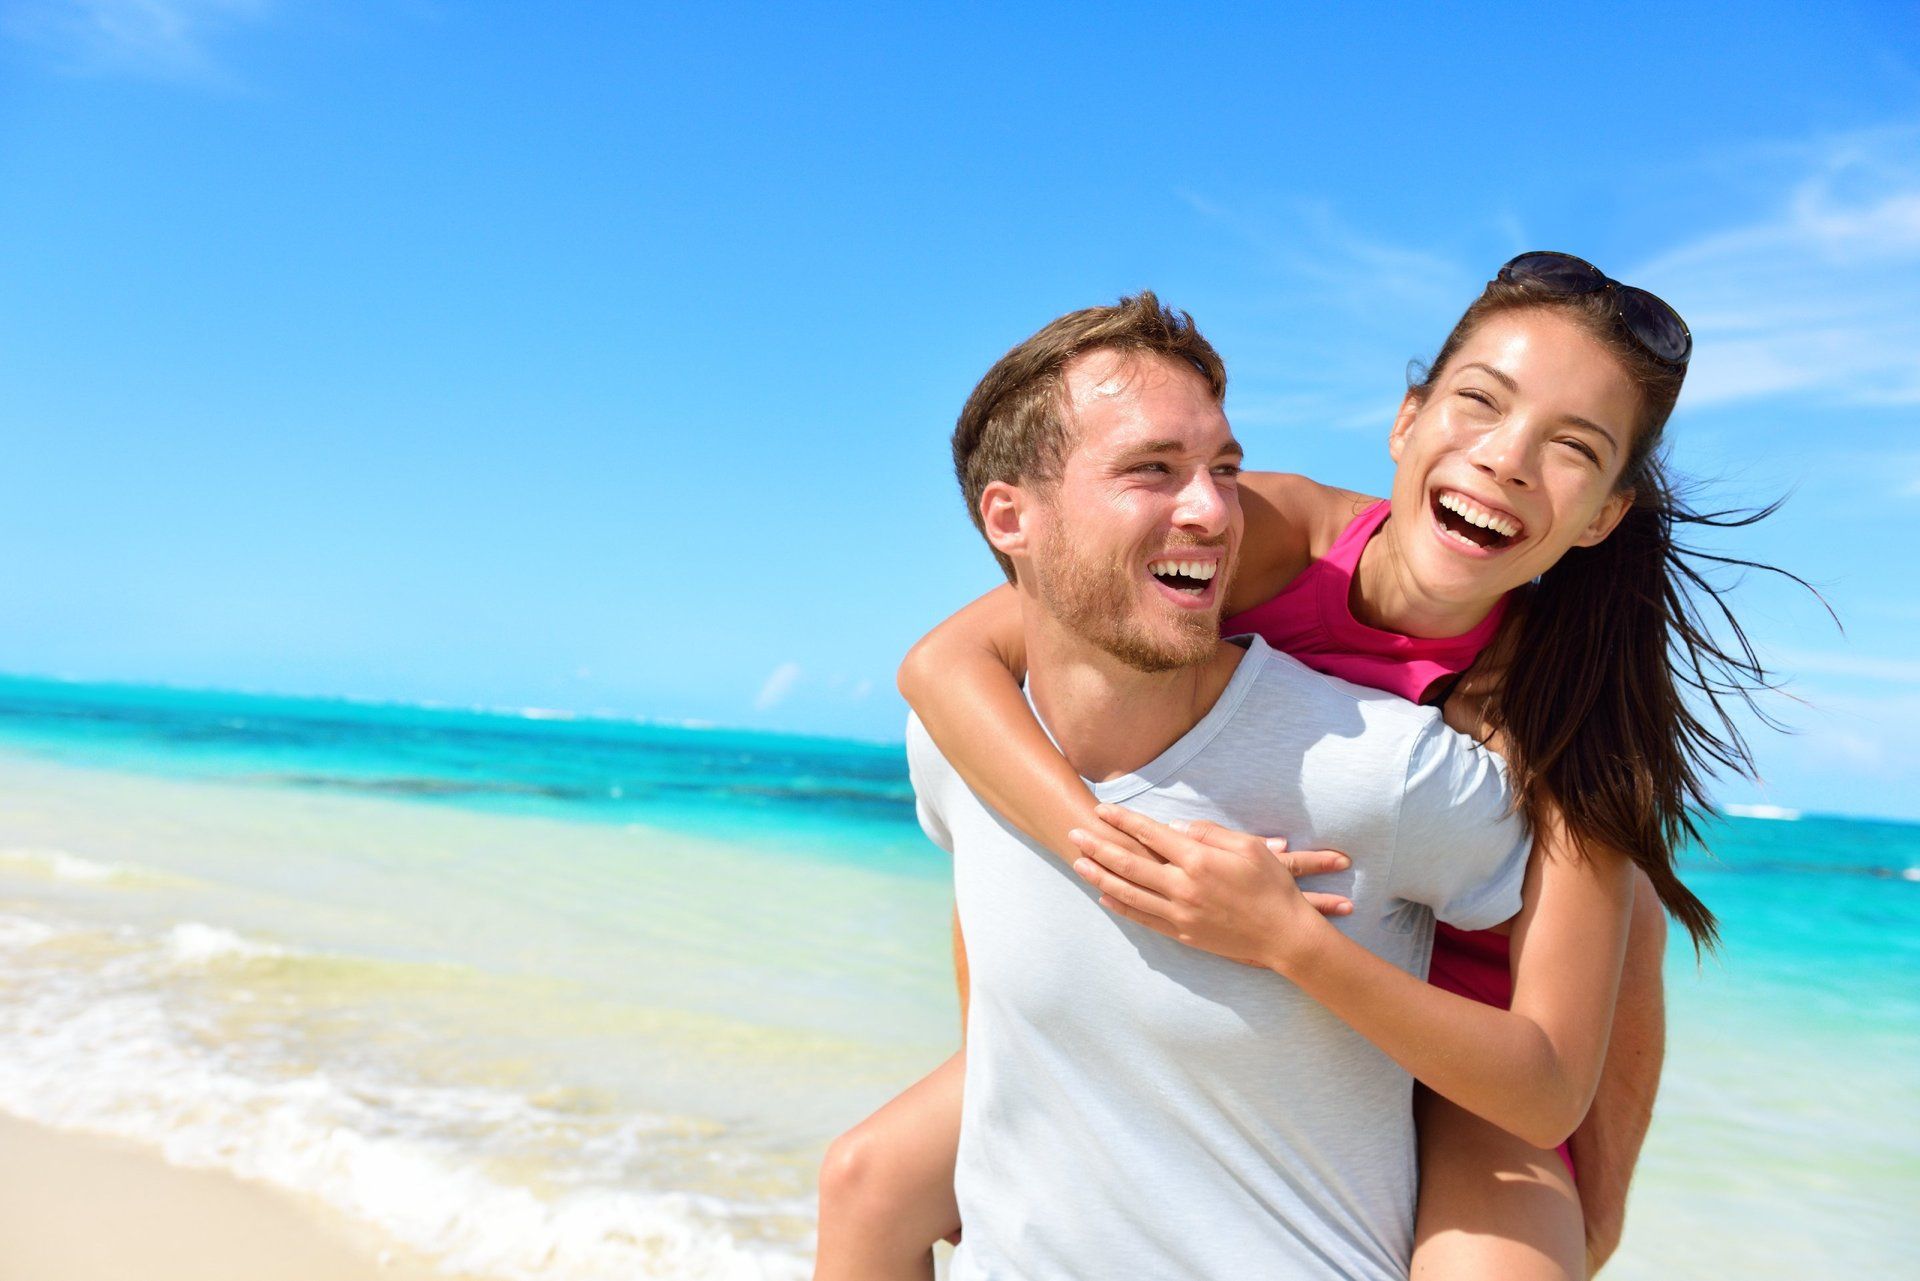 Man in white T shirt  on beach with girlfriend on his back.  Both are laughing.